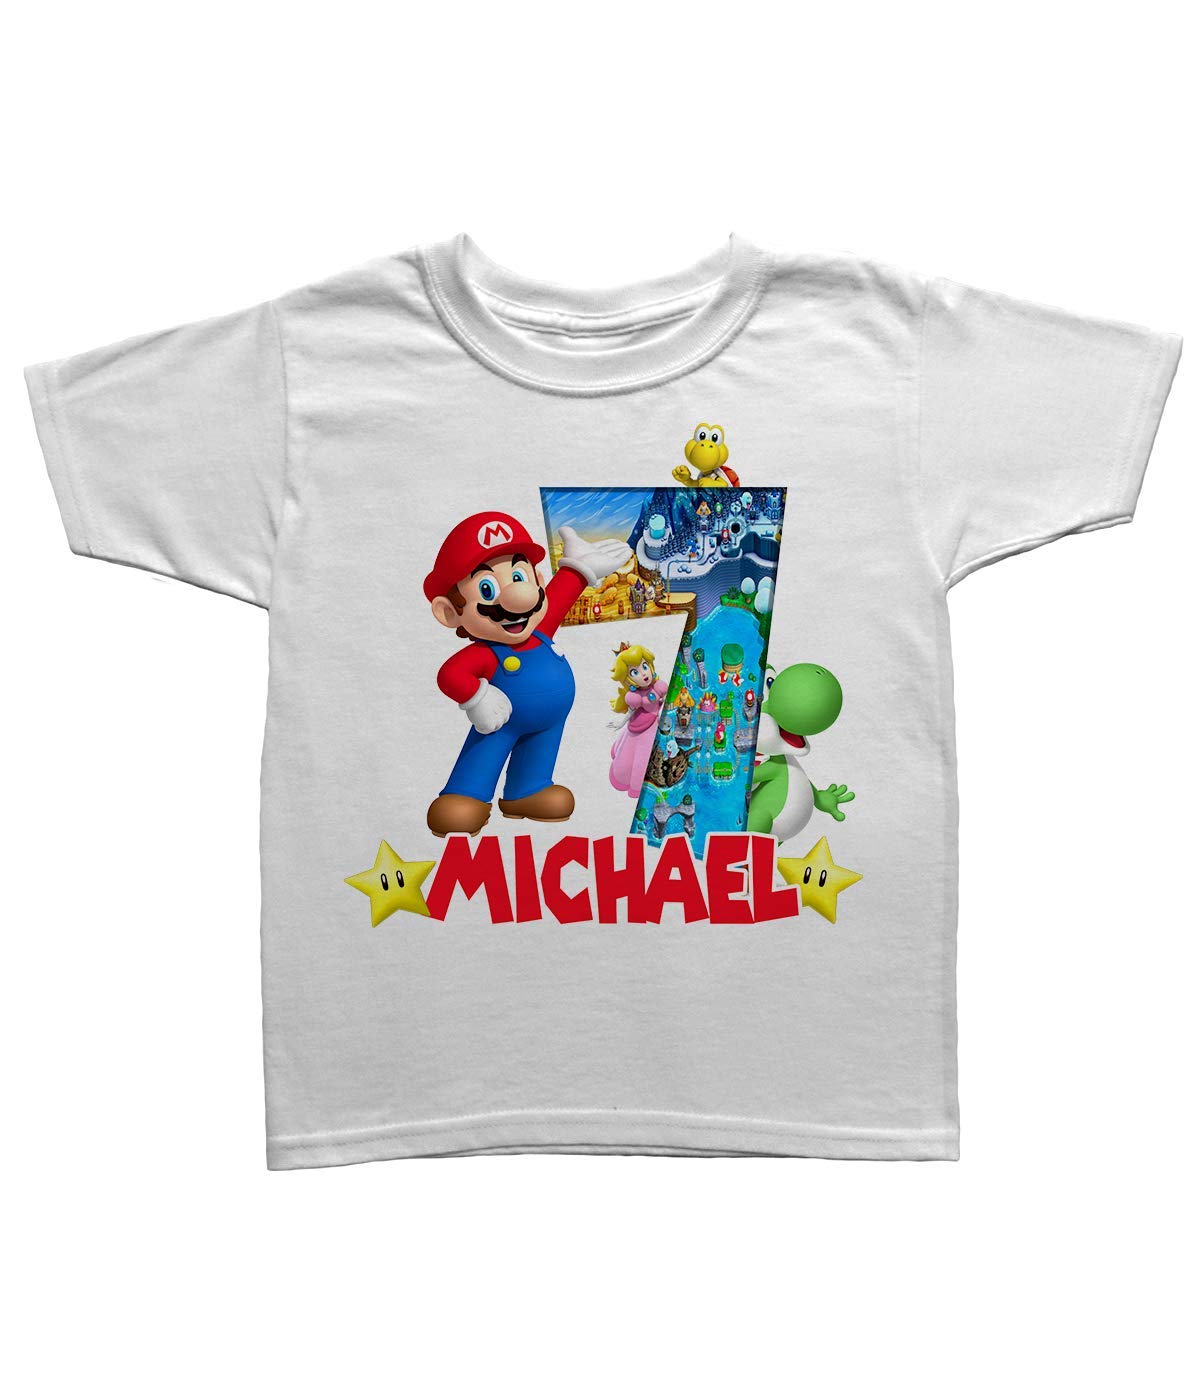 Super Mario birthday Kids T-Shirt, Personalized Children Toddlers Birthday Party tee for boys and girls Custom family shirt k4